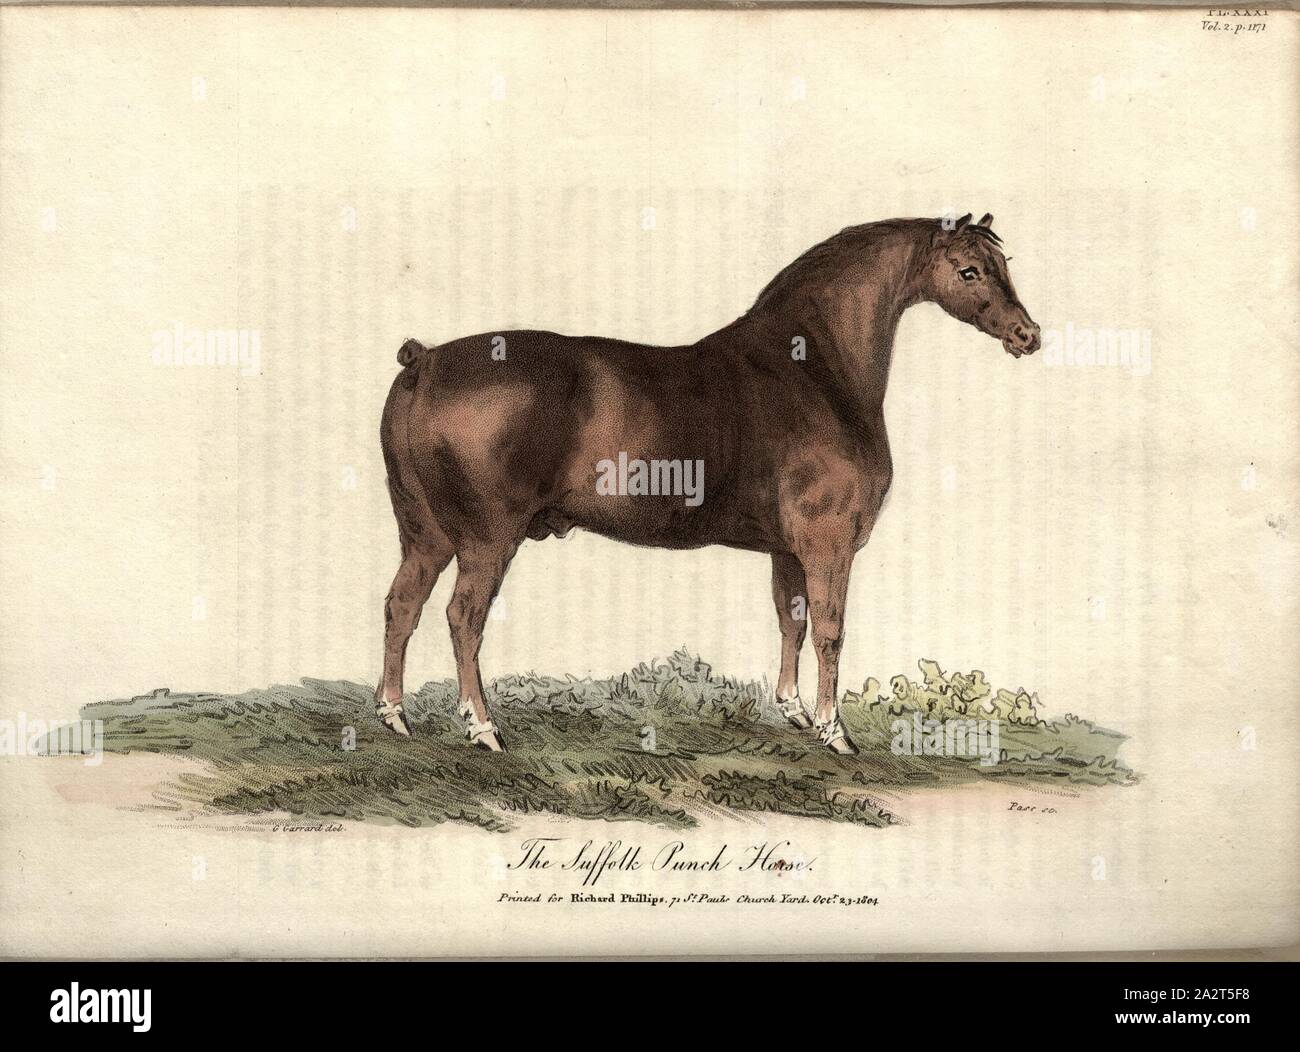 The Suffolk Punch Horse, Horse of the Suffolk Punch breed, signed: G. Garrard del, Pass sc, Fig. 30, Pl. XXXI, after p. 1170, Garrard, George (del.); Pass (sc.), R.W. Dickson: Practical agriculture, or, a complete system of modern husbandry: with the methods of planting, and the management of live stock. Bd. 2. London: printed for Richard Phillips; by R. Taylor and Co., 1805 Stock Photo